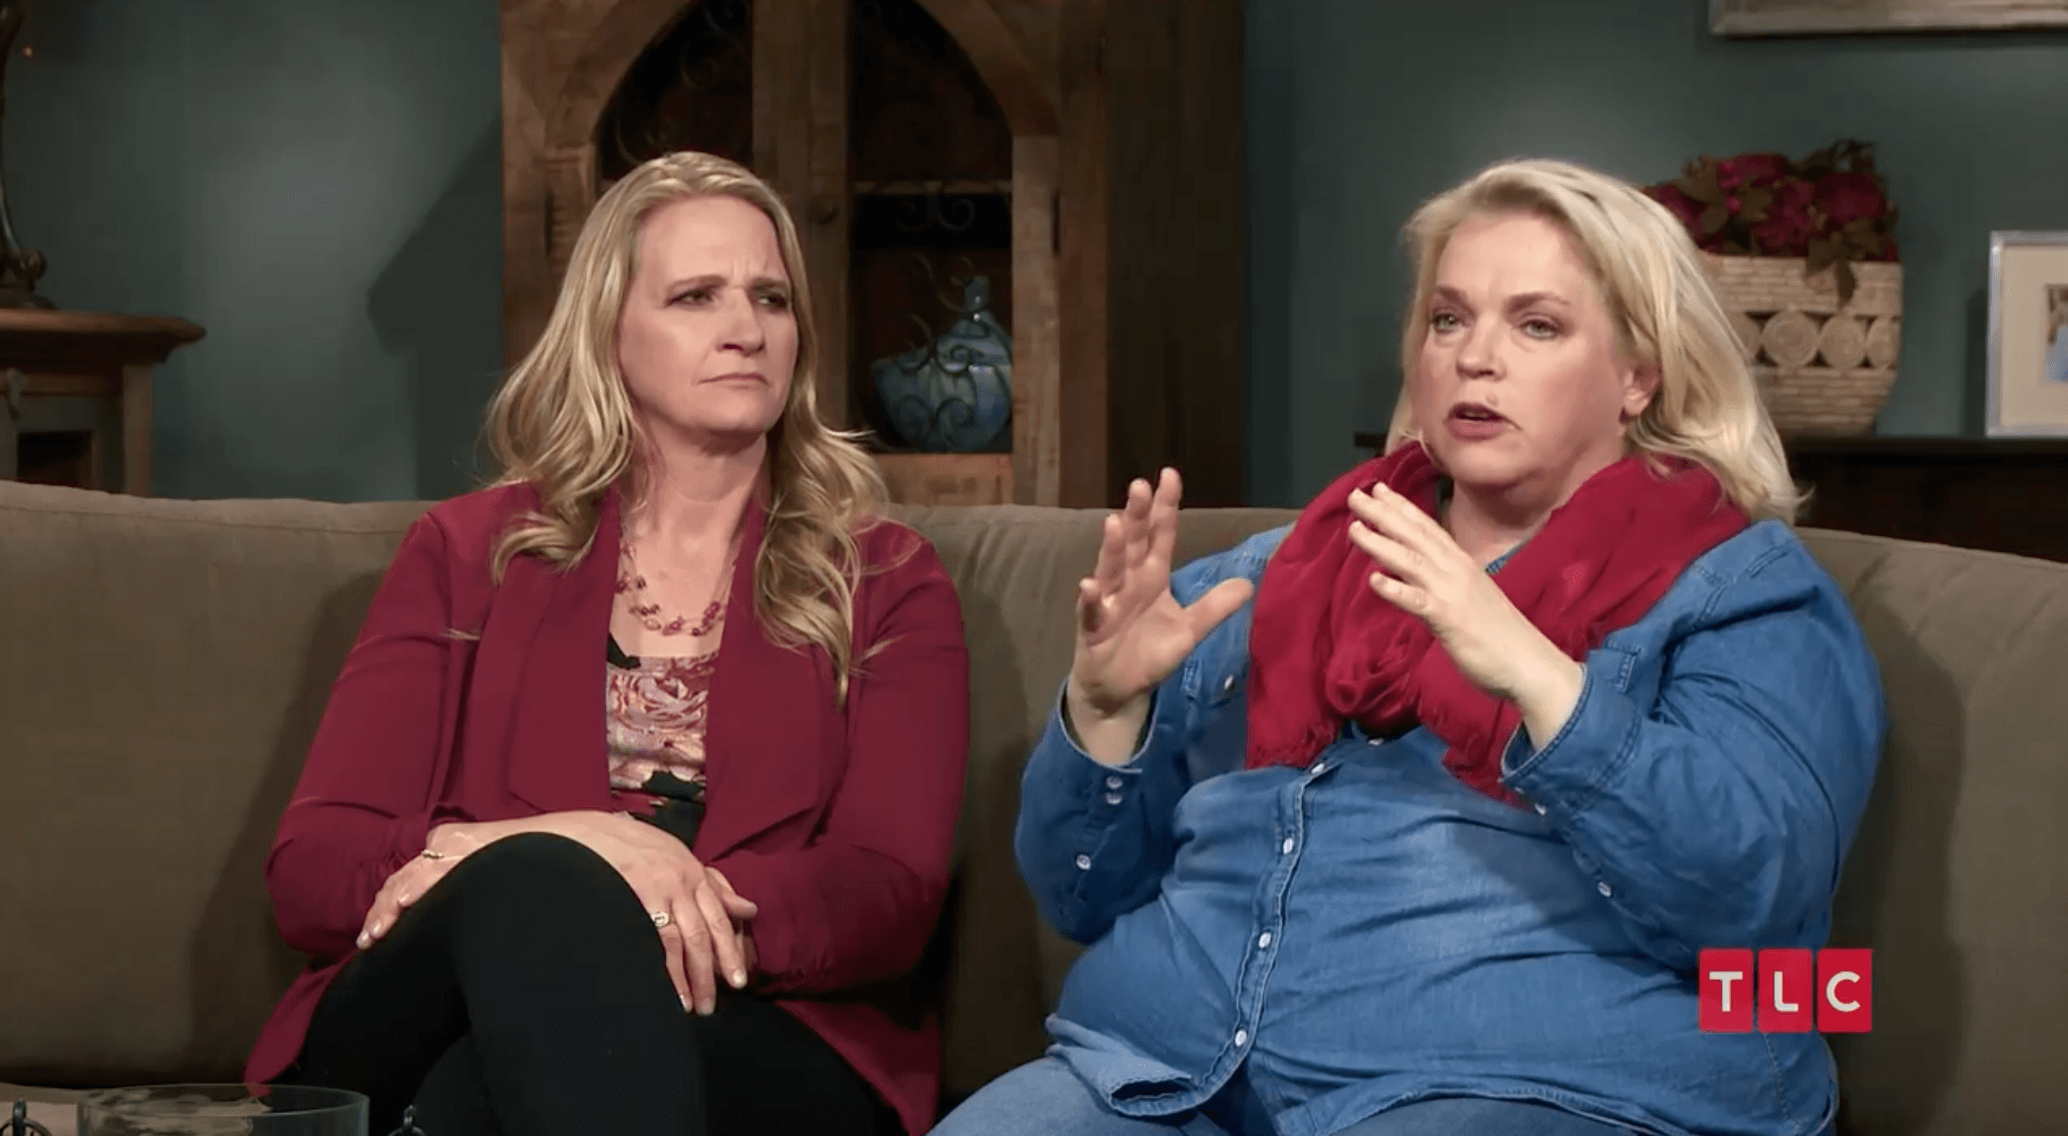 Christine Brown and Janelle Brown sitting together on a couch for a ‘Sister Wives’ interview on TLC.